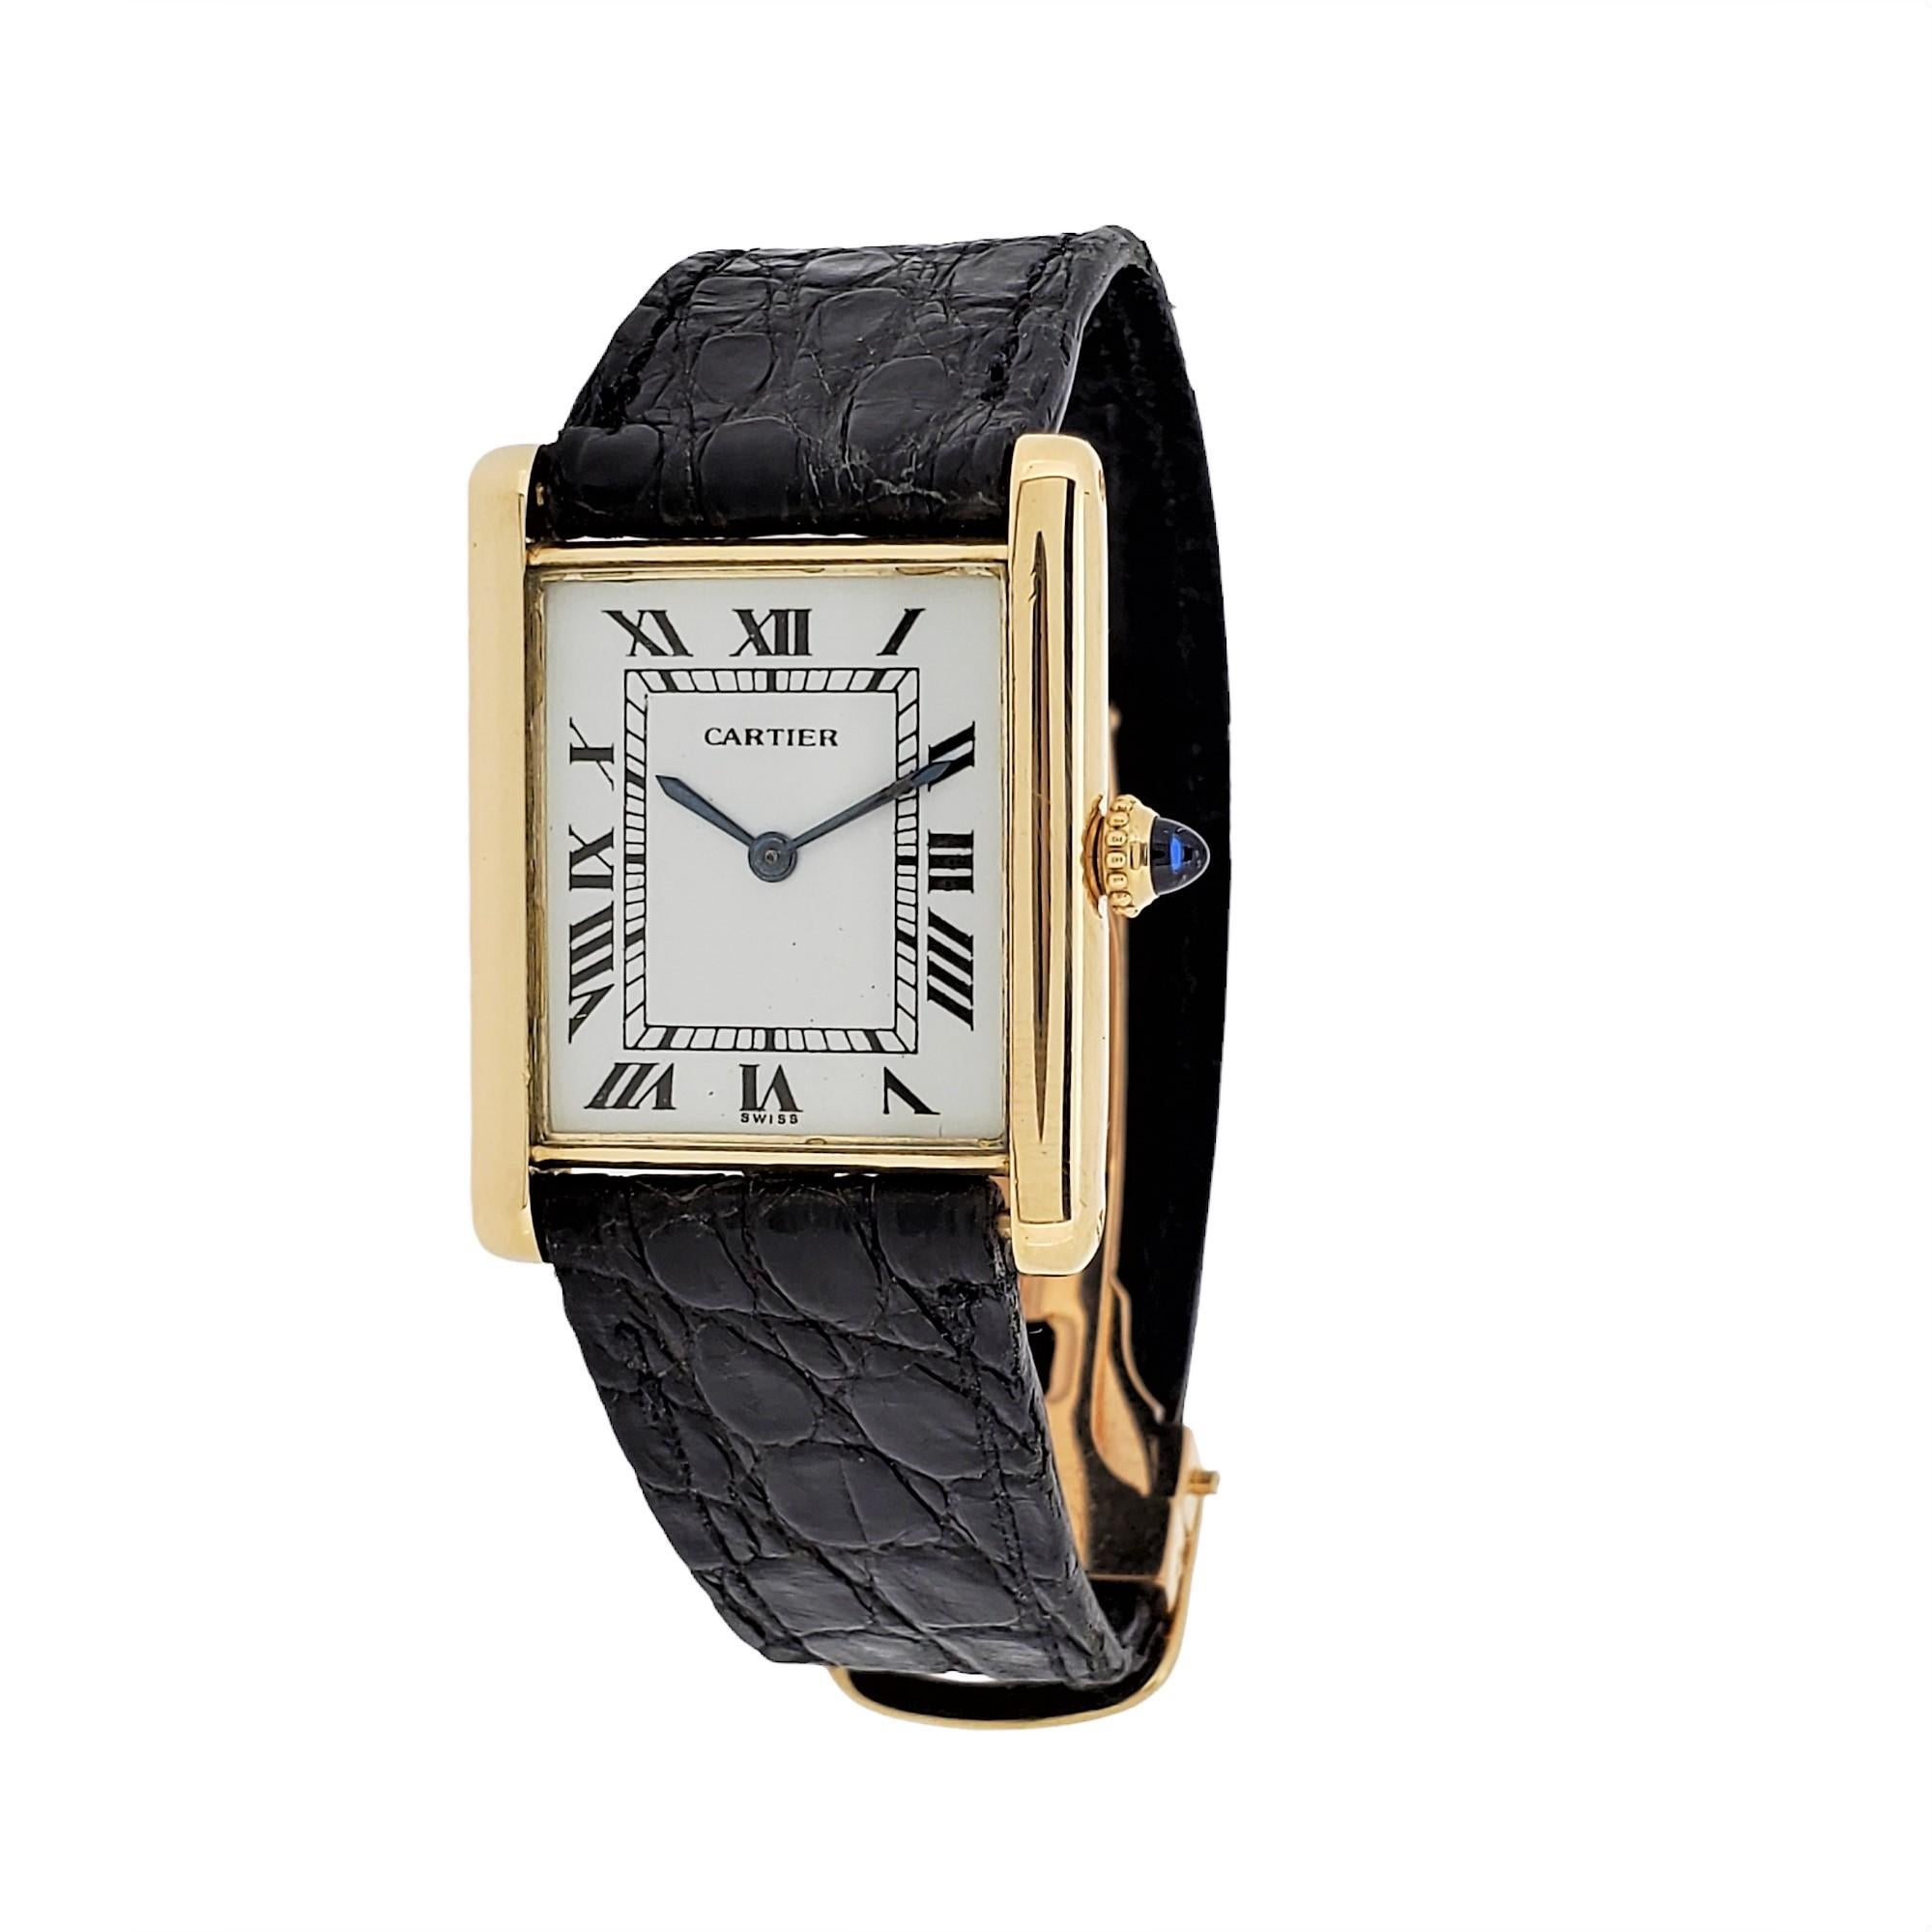 Introduction:
Cartier Paris Vintage Tank LC GM Extra Thin, Large size made in 18K yellow 1st series, Circa 1975-1980.  The watch measures 24 x 30 x 4.4mm thick.  The watch is accompanied with a Cartier Deployant buckle, and strap.  The watch is